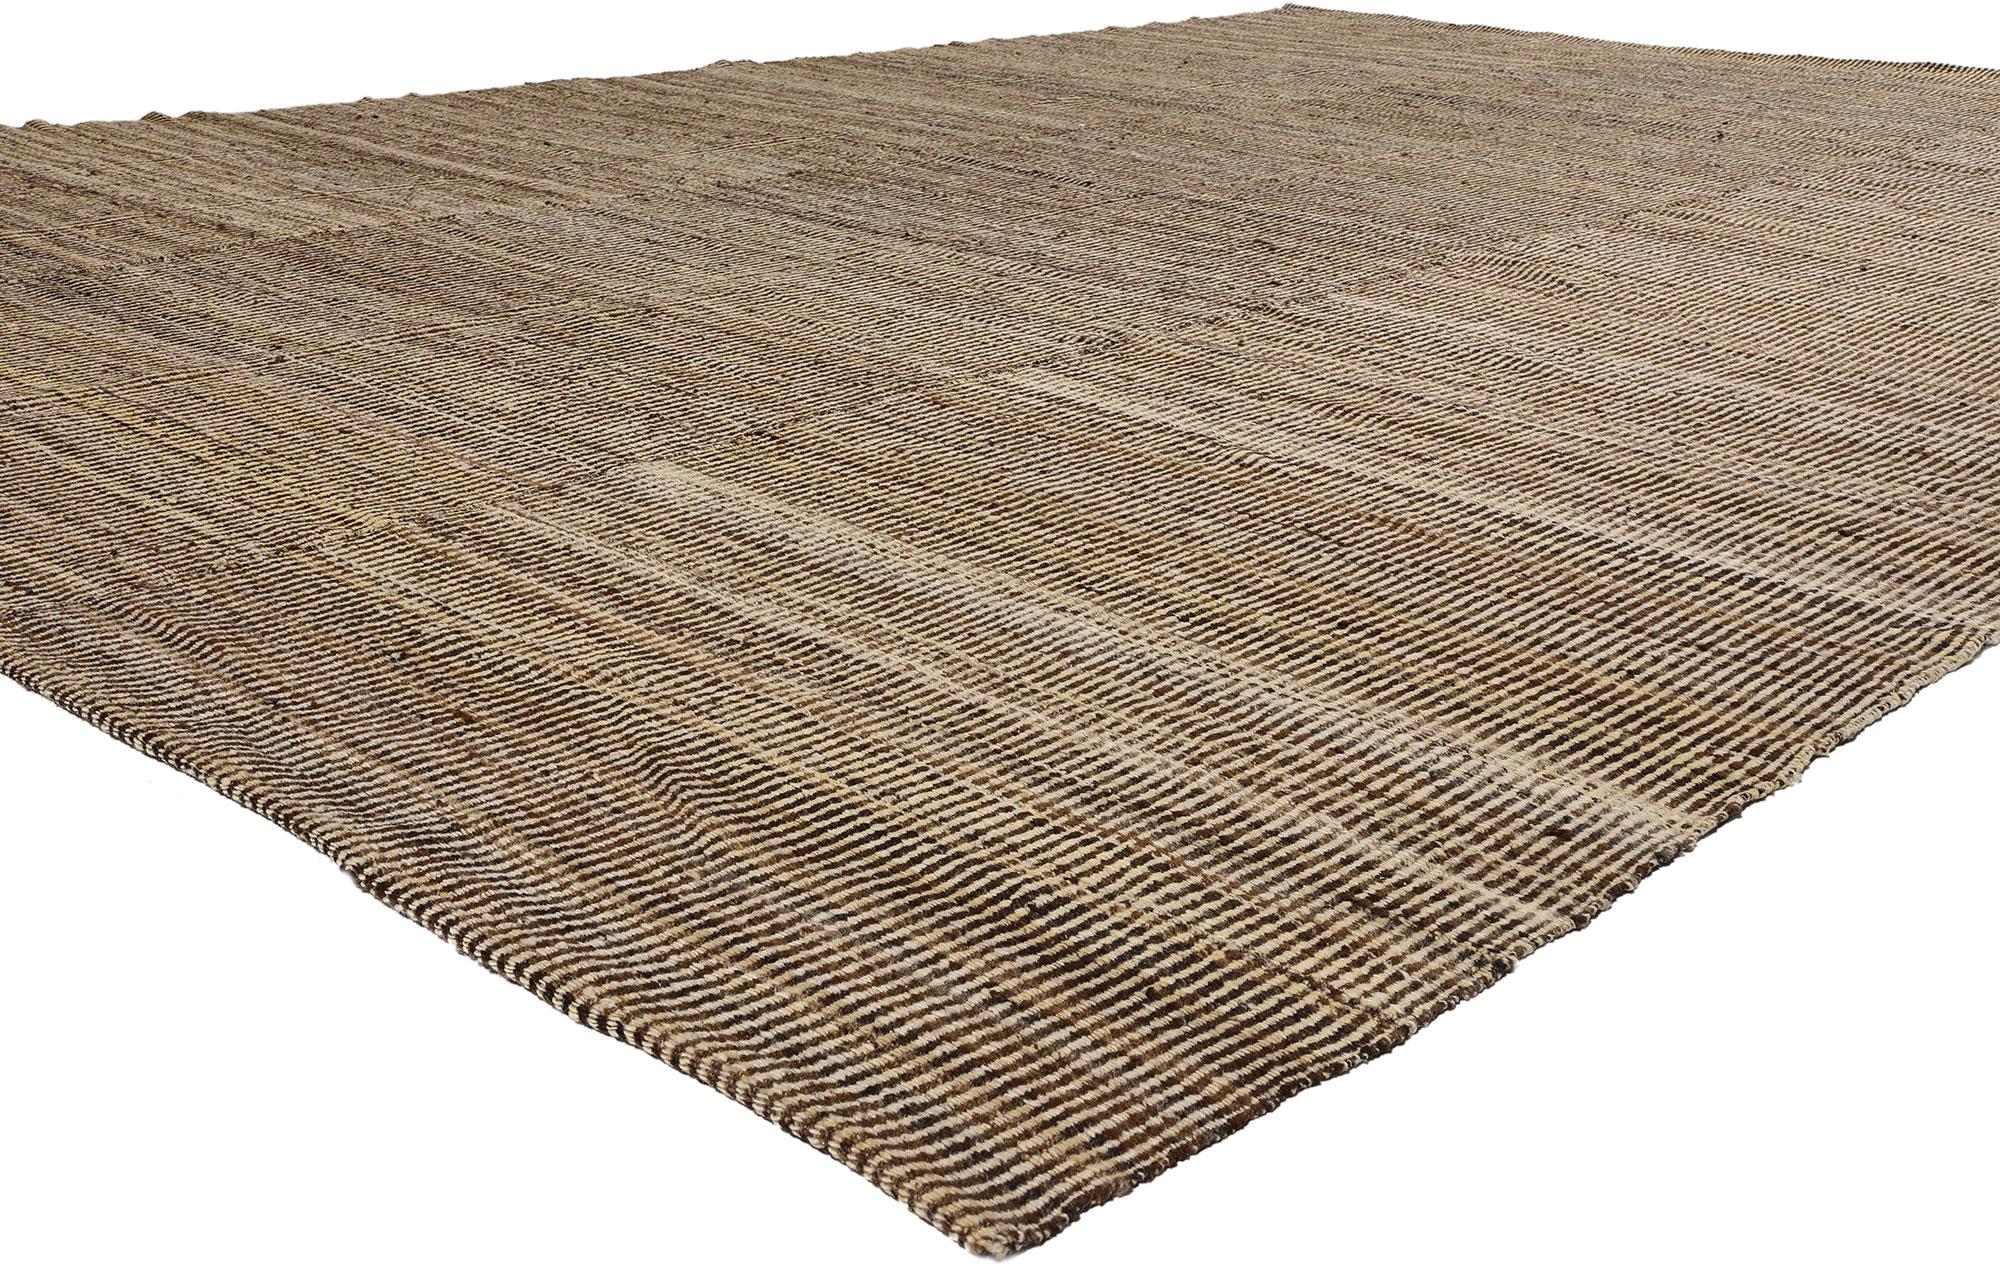 81101 Modern Neutral Earth-Tone Kilim Rug, 10'00 x 13'09. Introducing our handwoven modern earth-tone kilim rug, a stunning fusion of organic modernity and beach house charm. Crafted with natural fibers and meticulous attention to detail, this